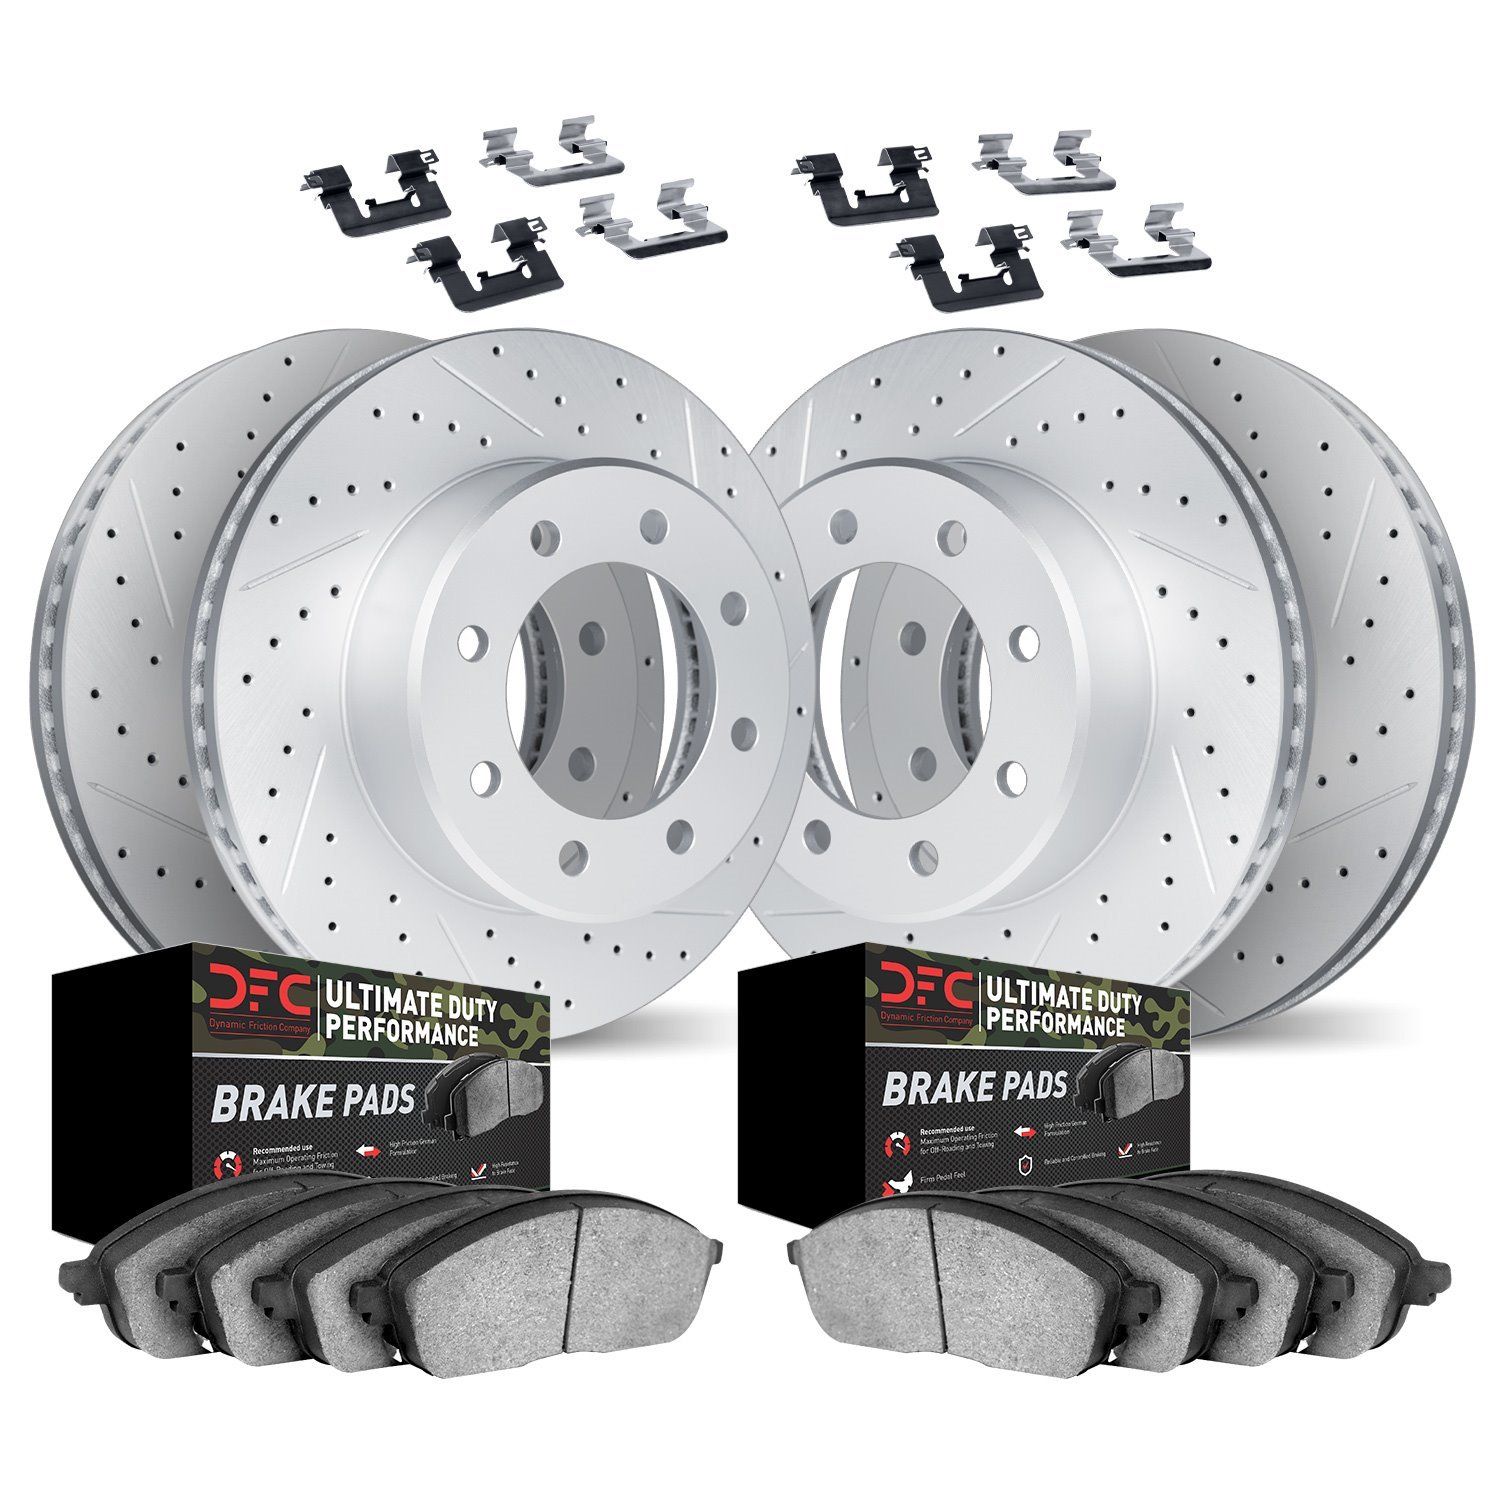 2414-54035 Geoperformance Drilled/Slotted Brake Rotors with Ultimate-Duty Brake Pads Kit & Hardware, 2005-2007 Ford/Lincoln/Merc